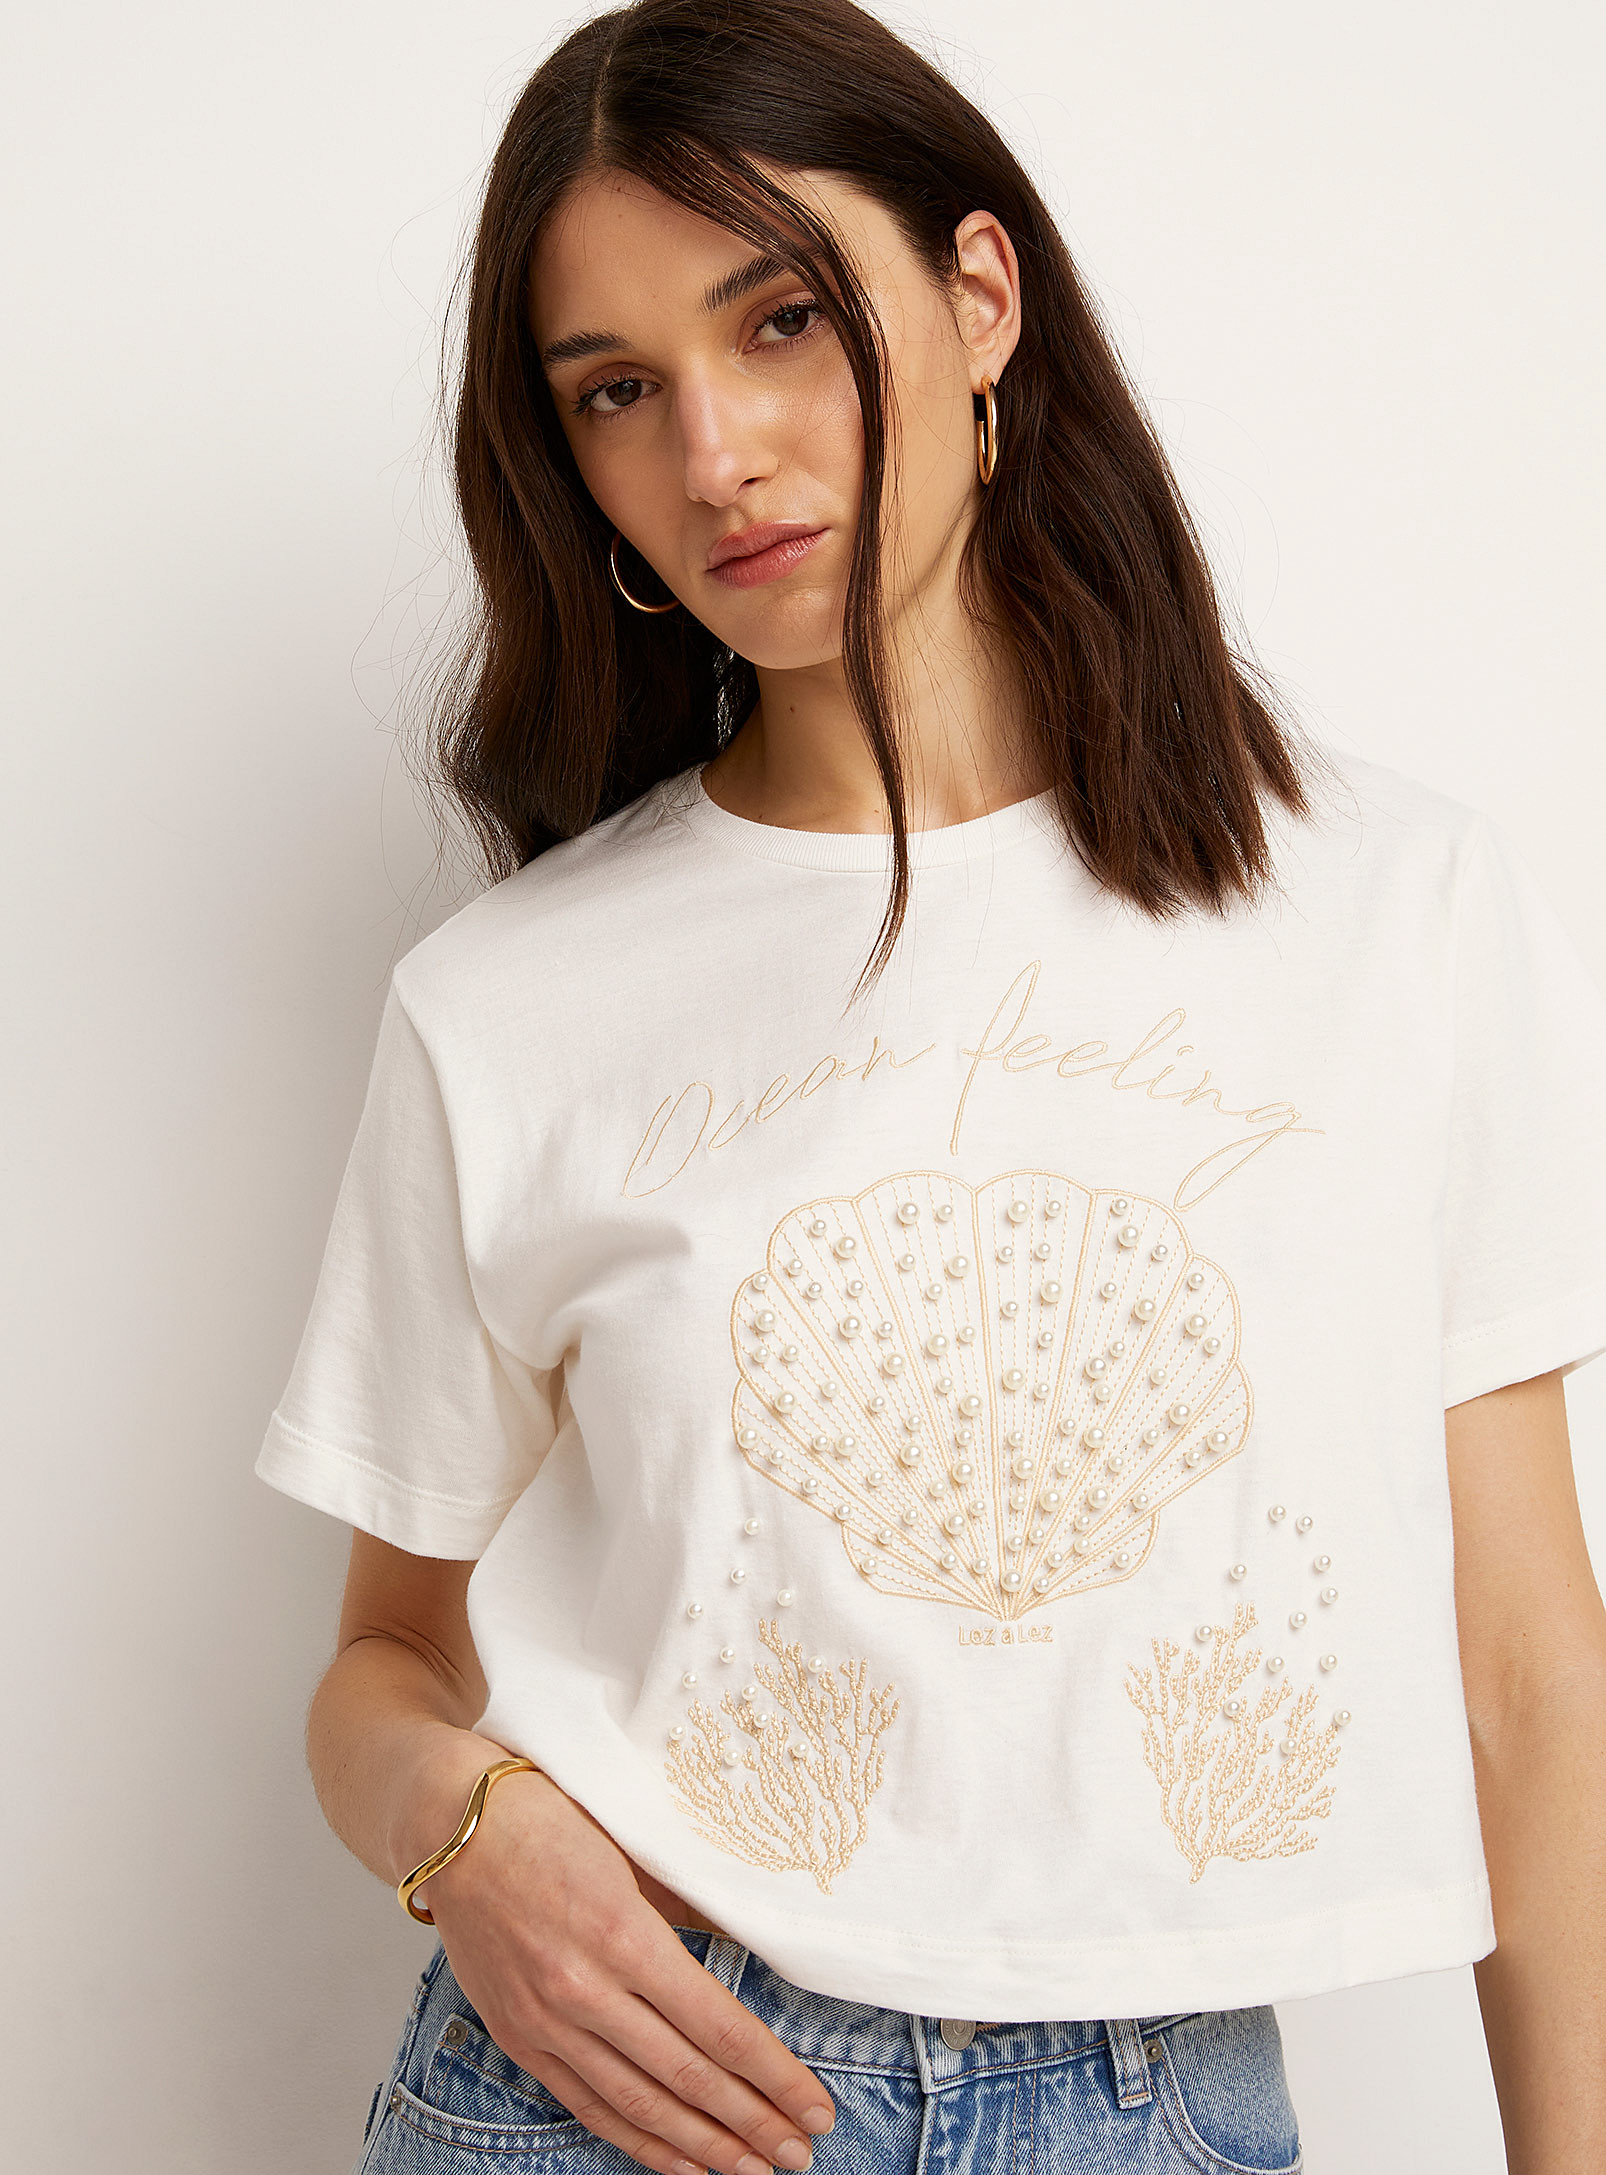 Icone Marine Embroidery And Pearls T-shirt In Ivory White